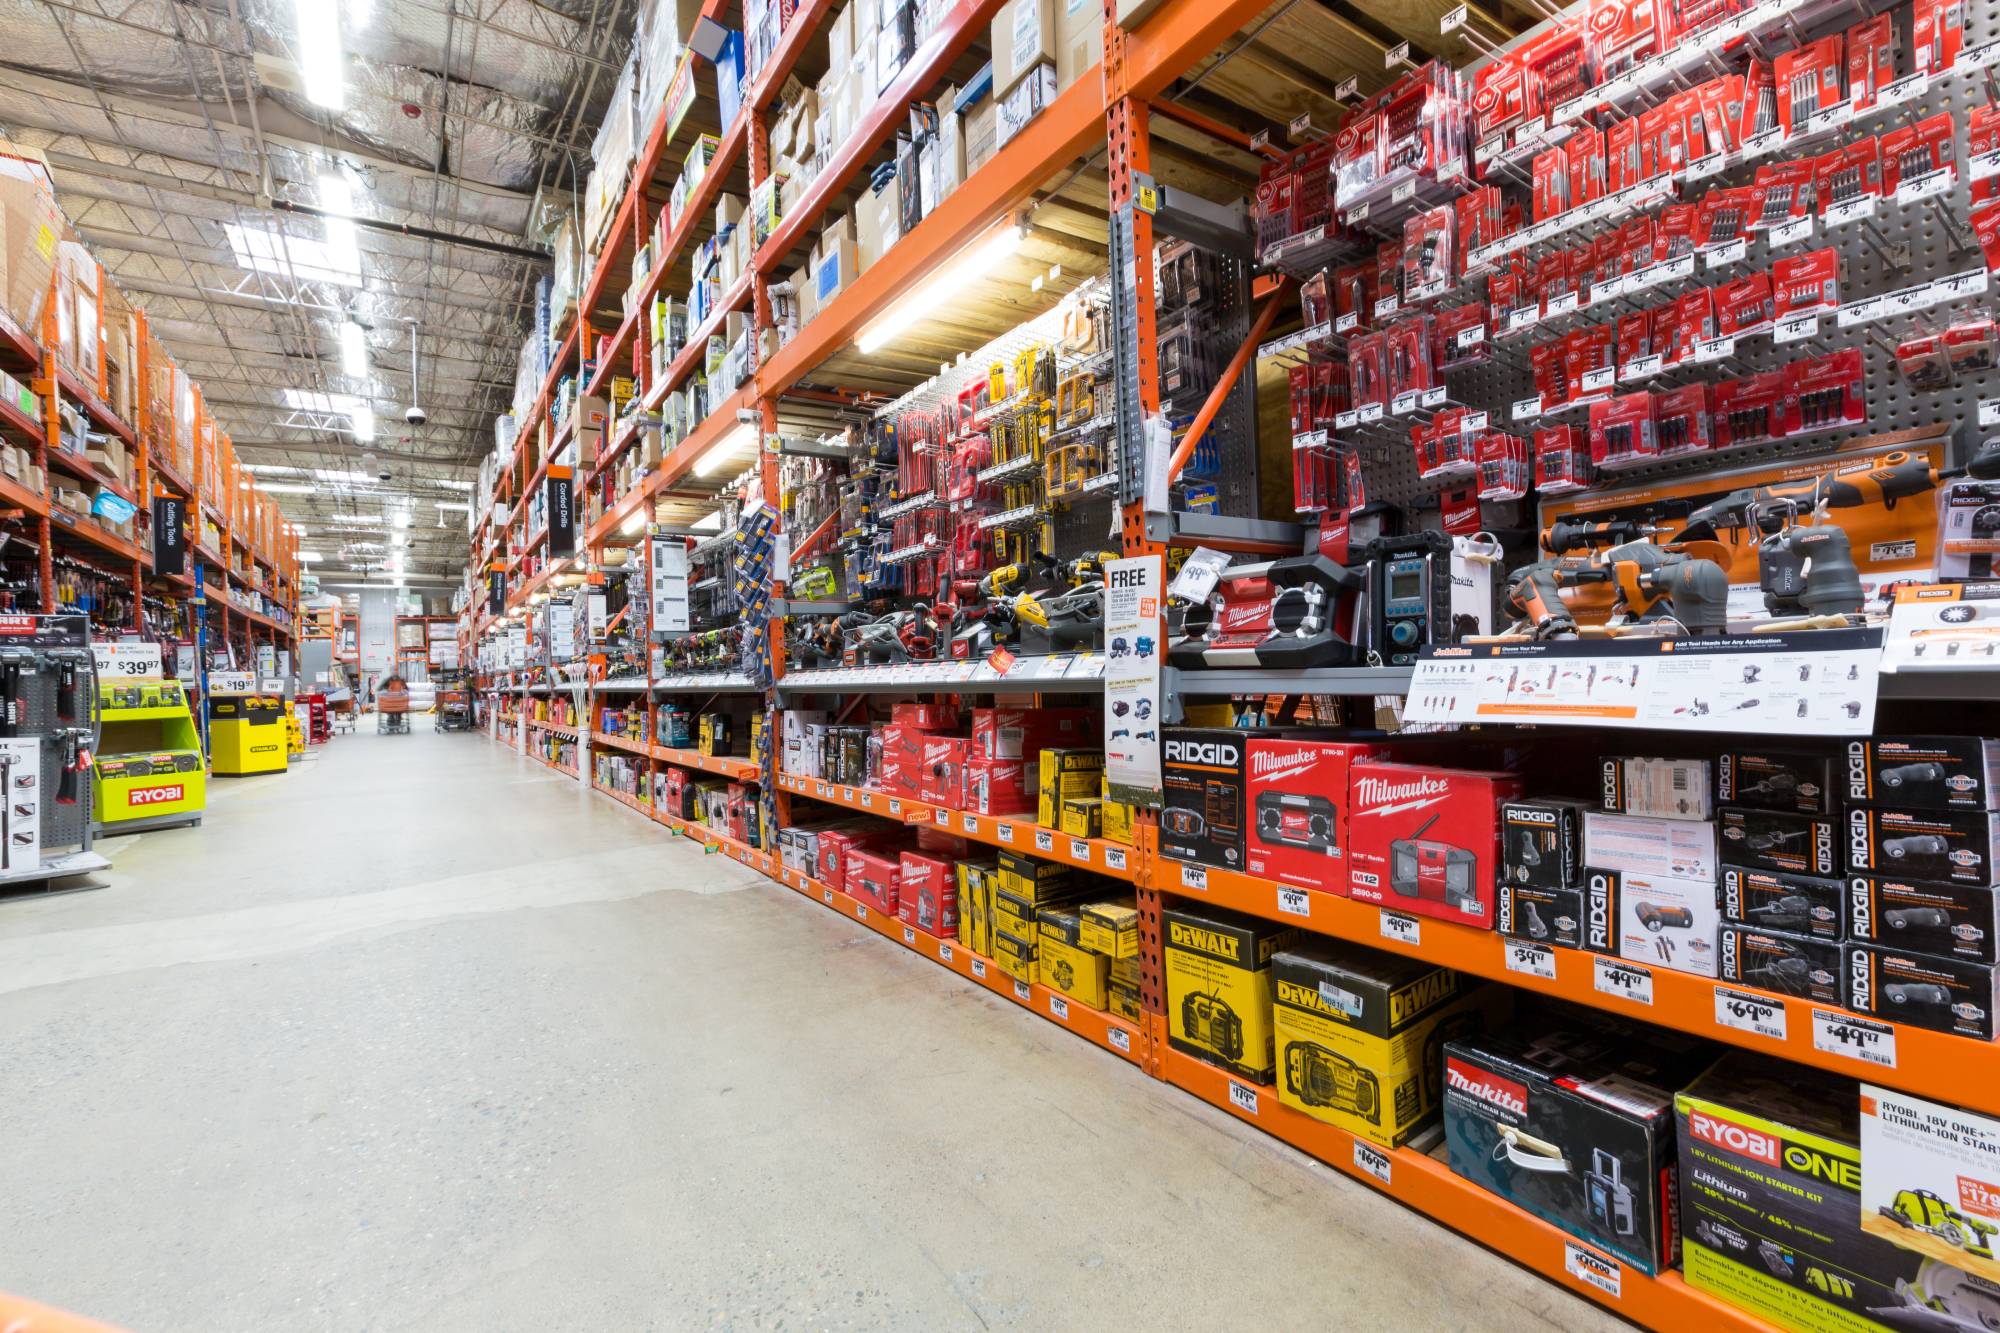 Does Home Depot Offer International Shipping? - Worldwide Shopping Guide